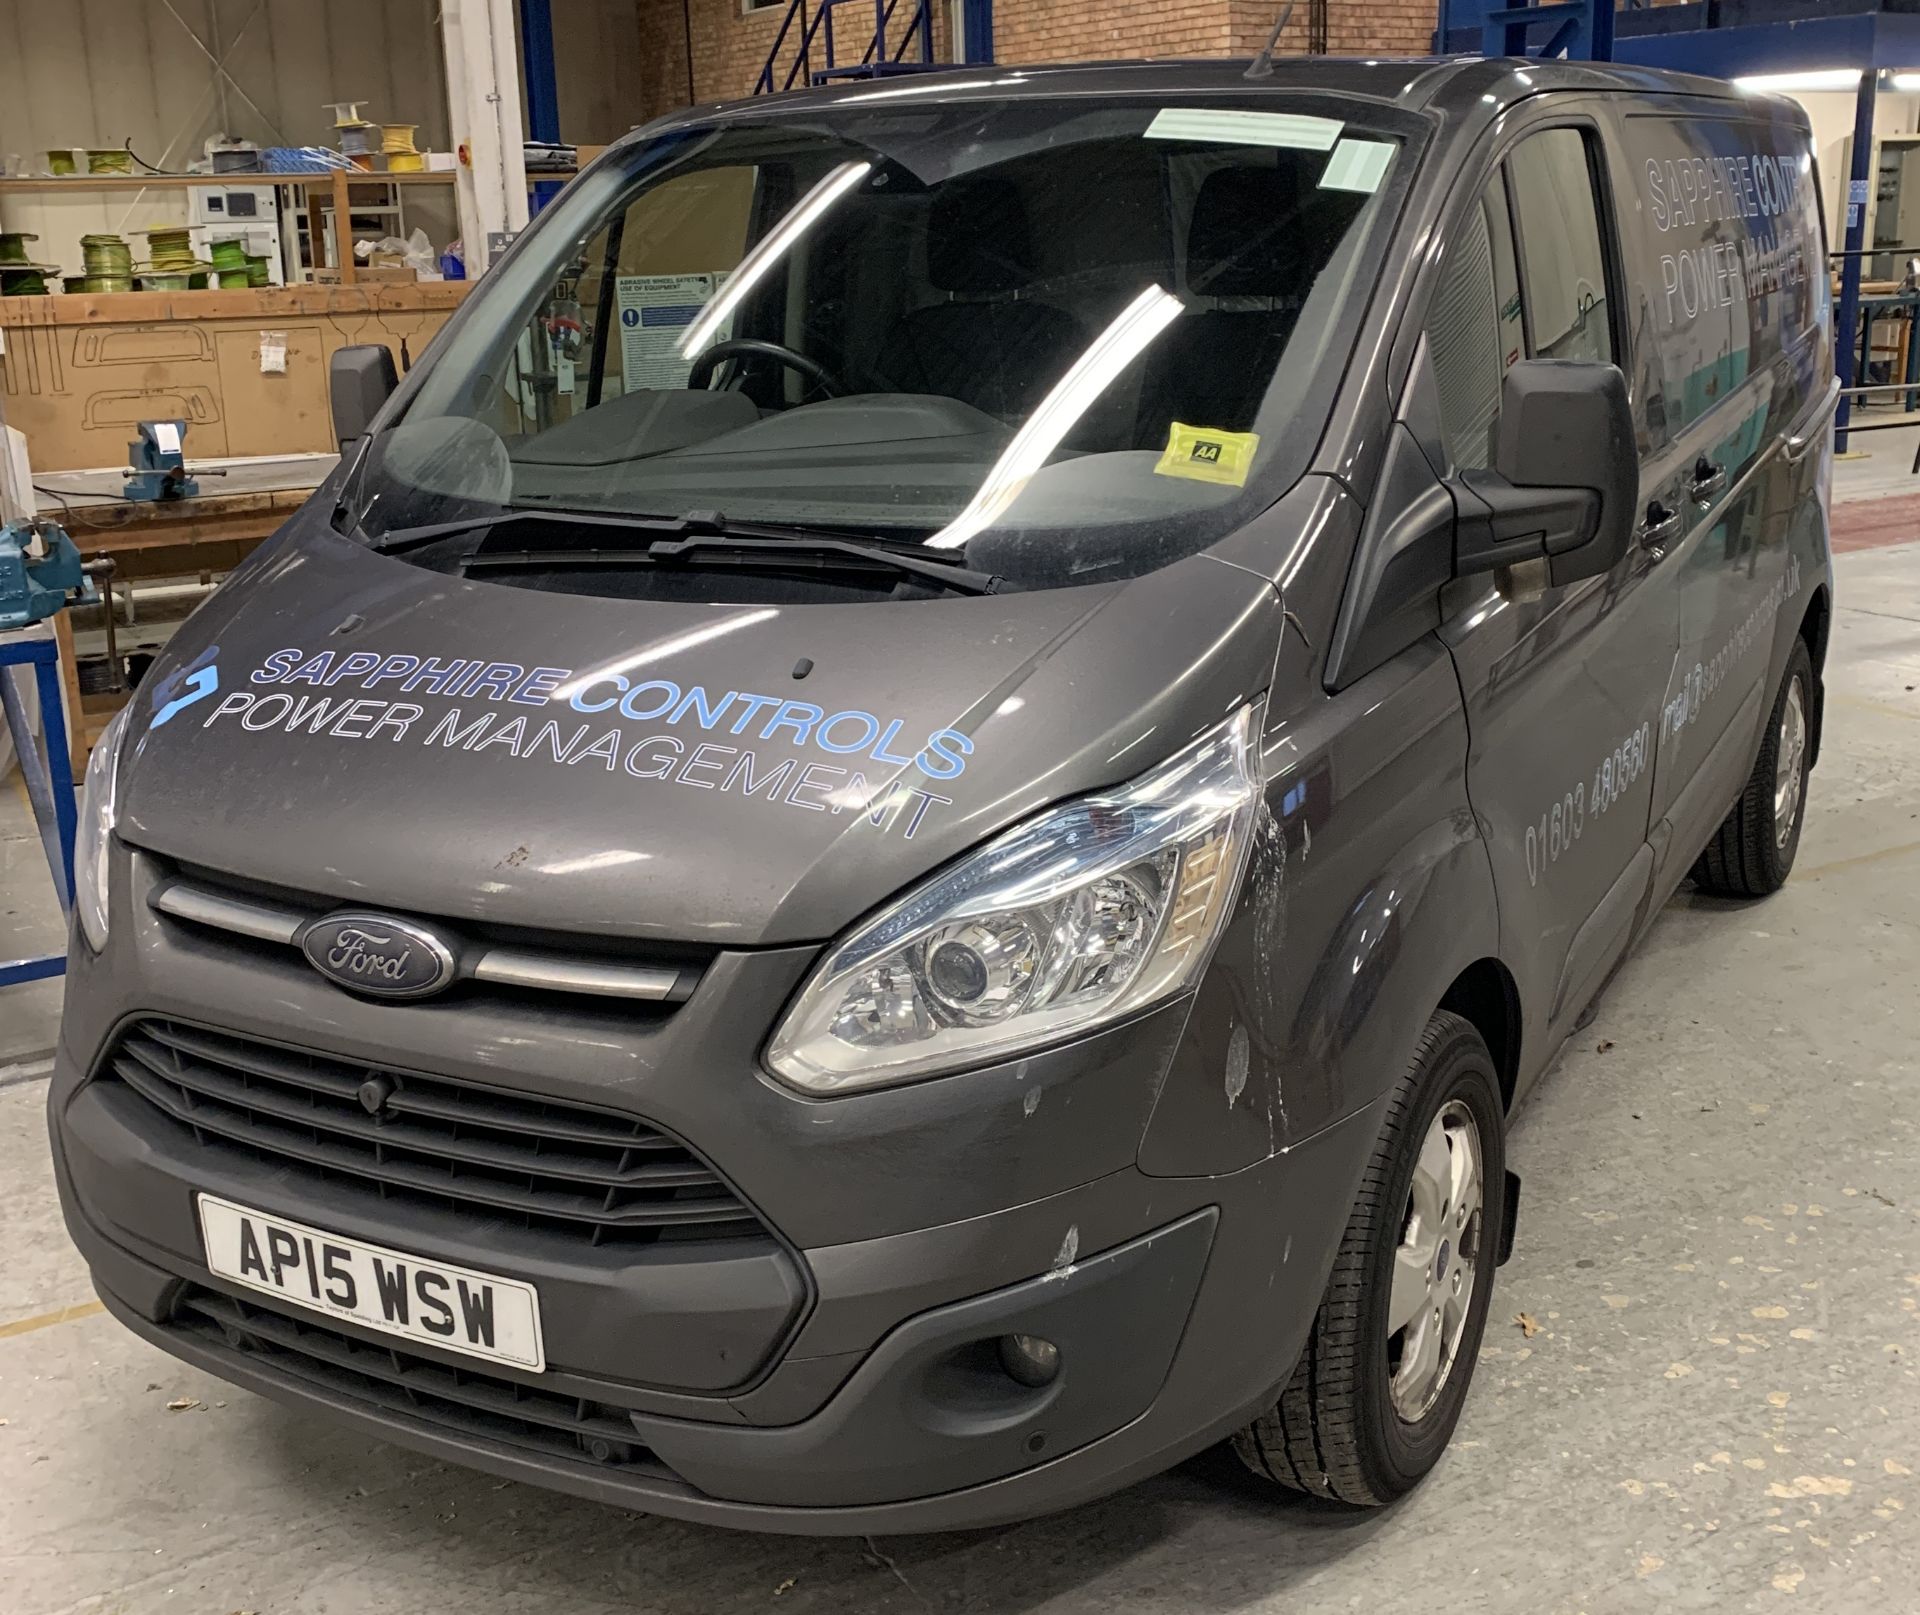 Ford Transit Custom 270 L1 low roof panel van, registration number AP15 WSW, first registered 18th - Image 2 of 10